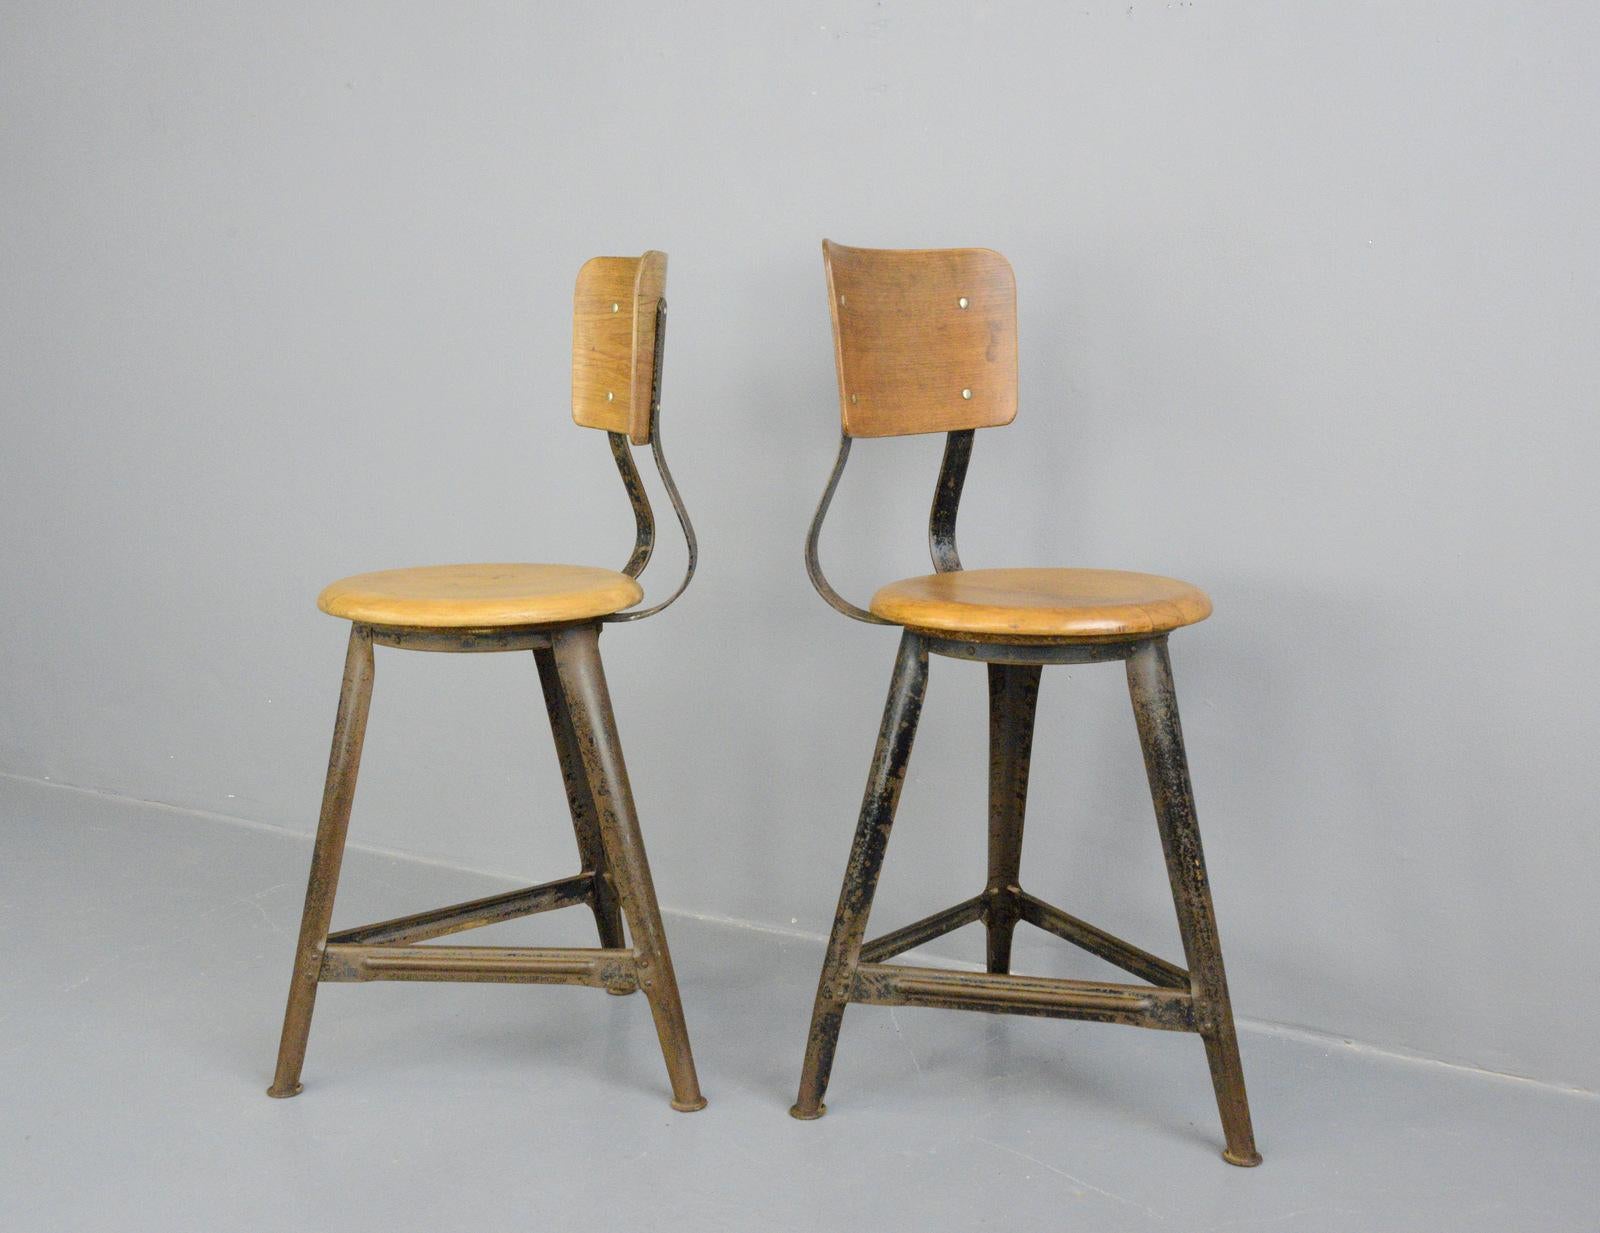 Steel Industrial Work Stools by Ama, circa 1930s